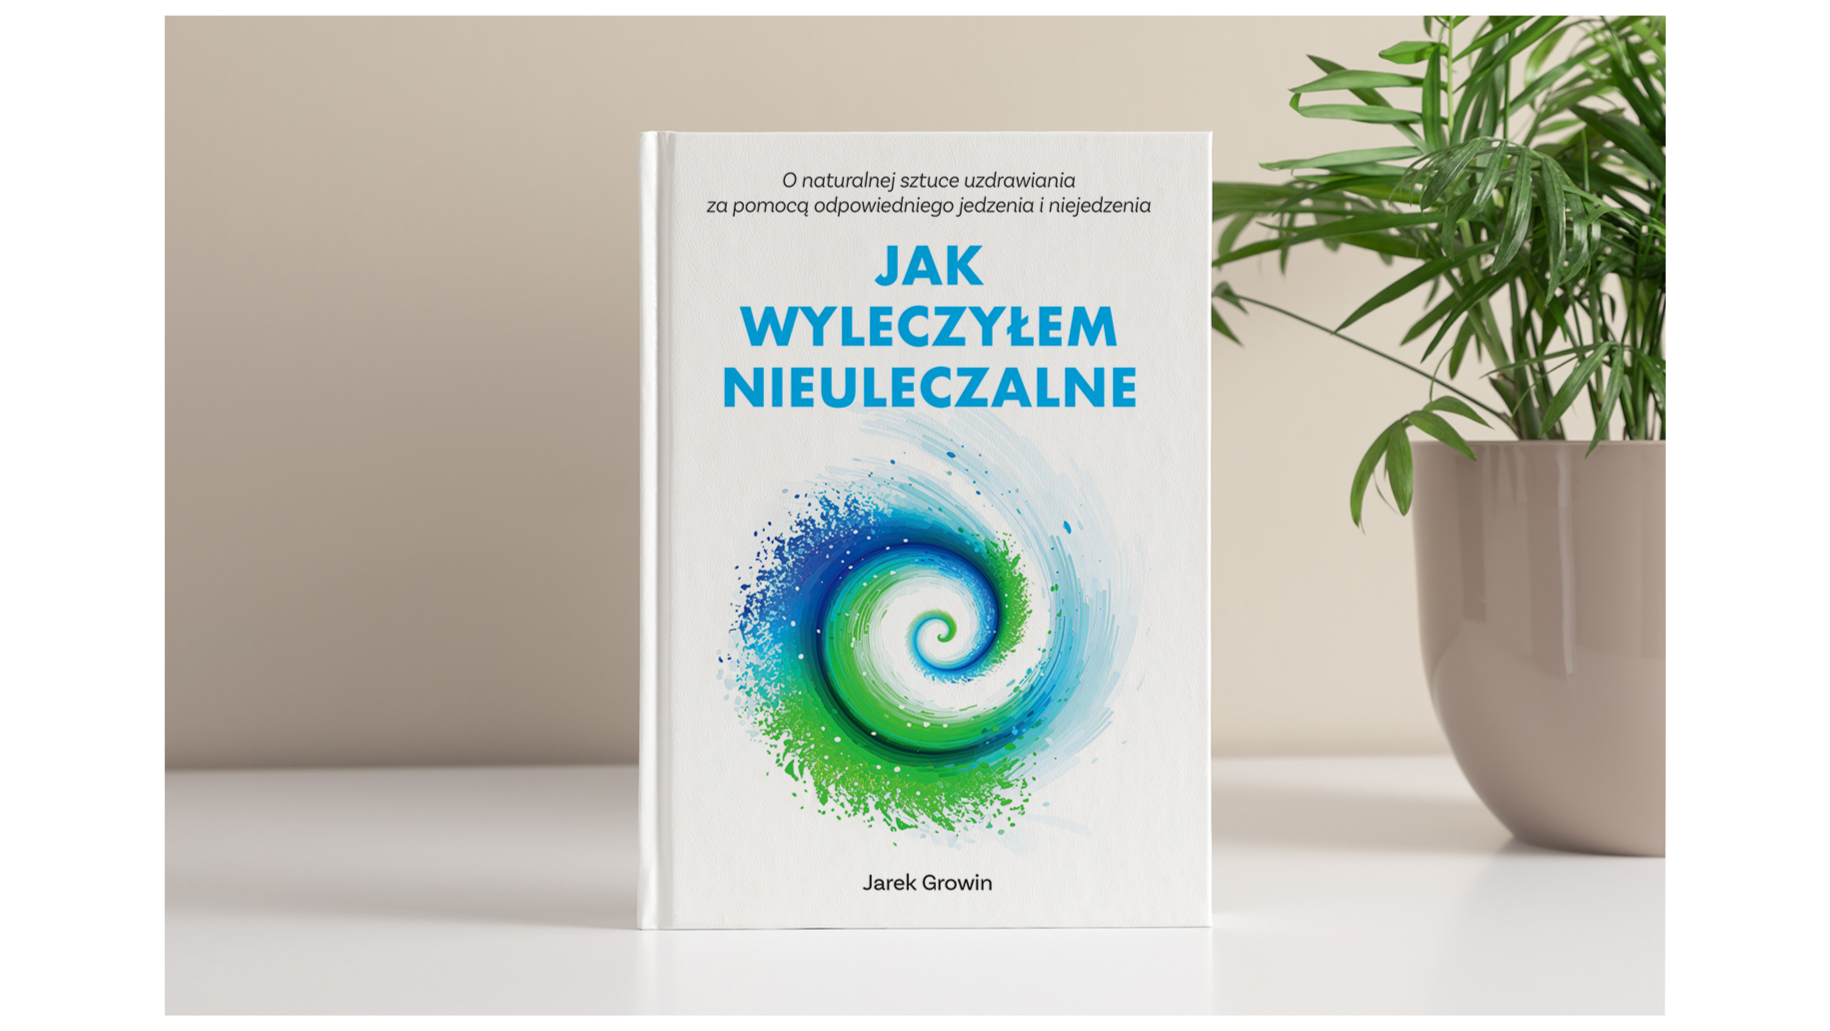 The book How I Cured The INCURABLE - available in polish language